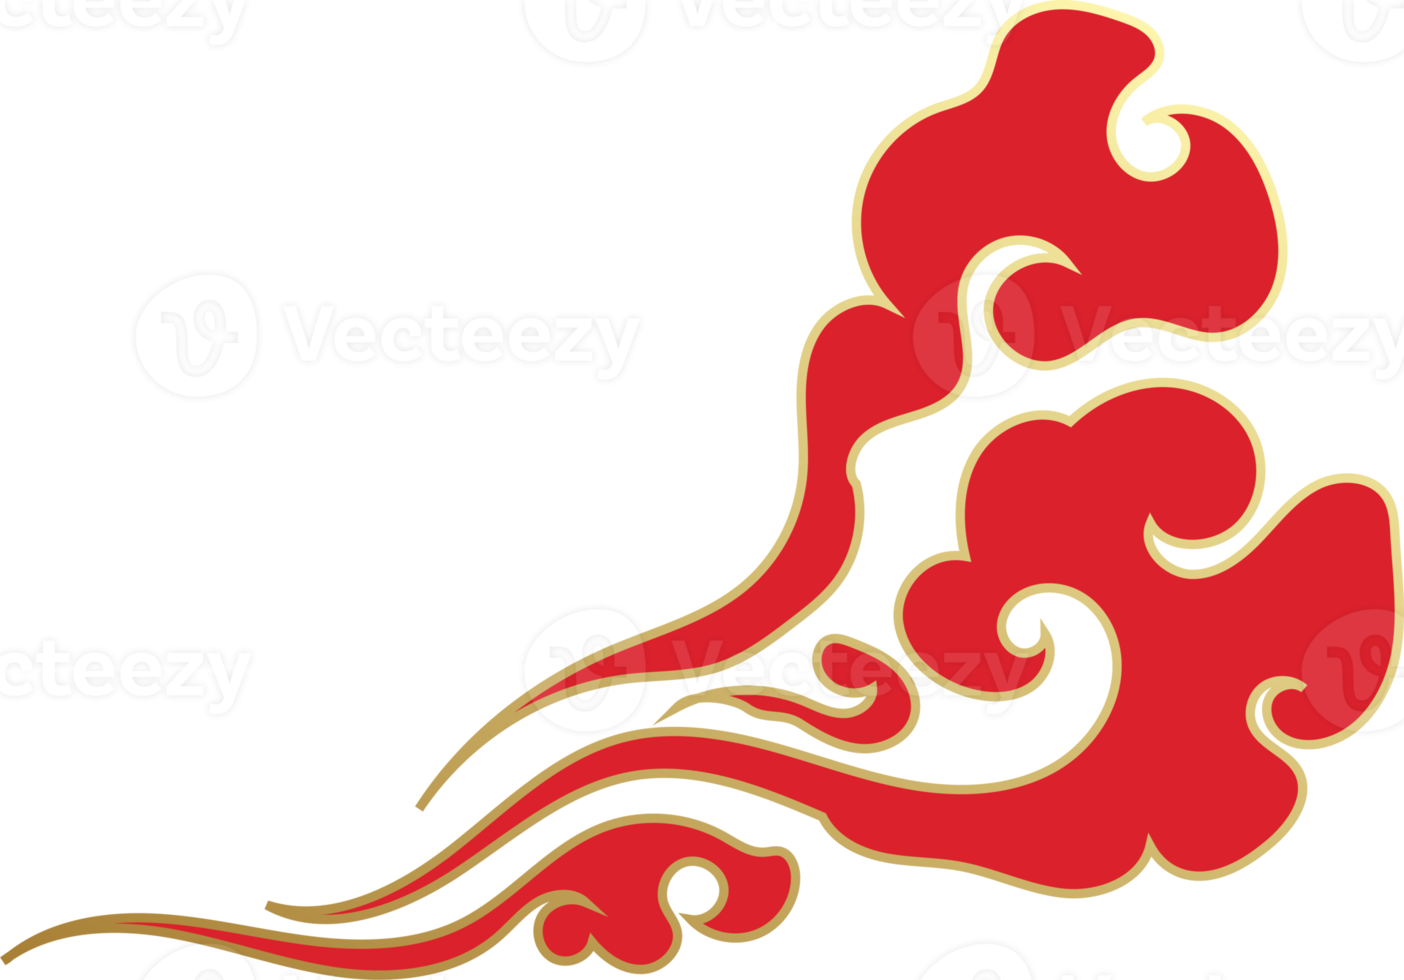 Chinese Red Clouds Illustration png